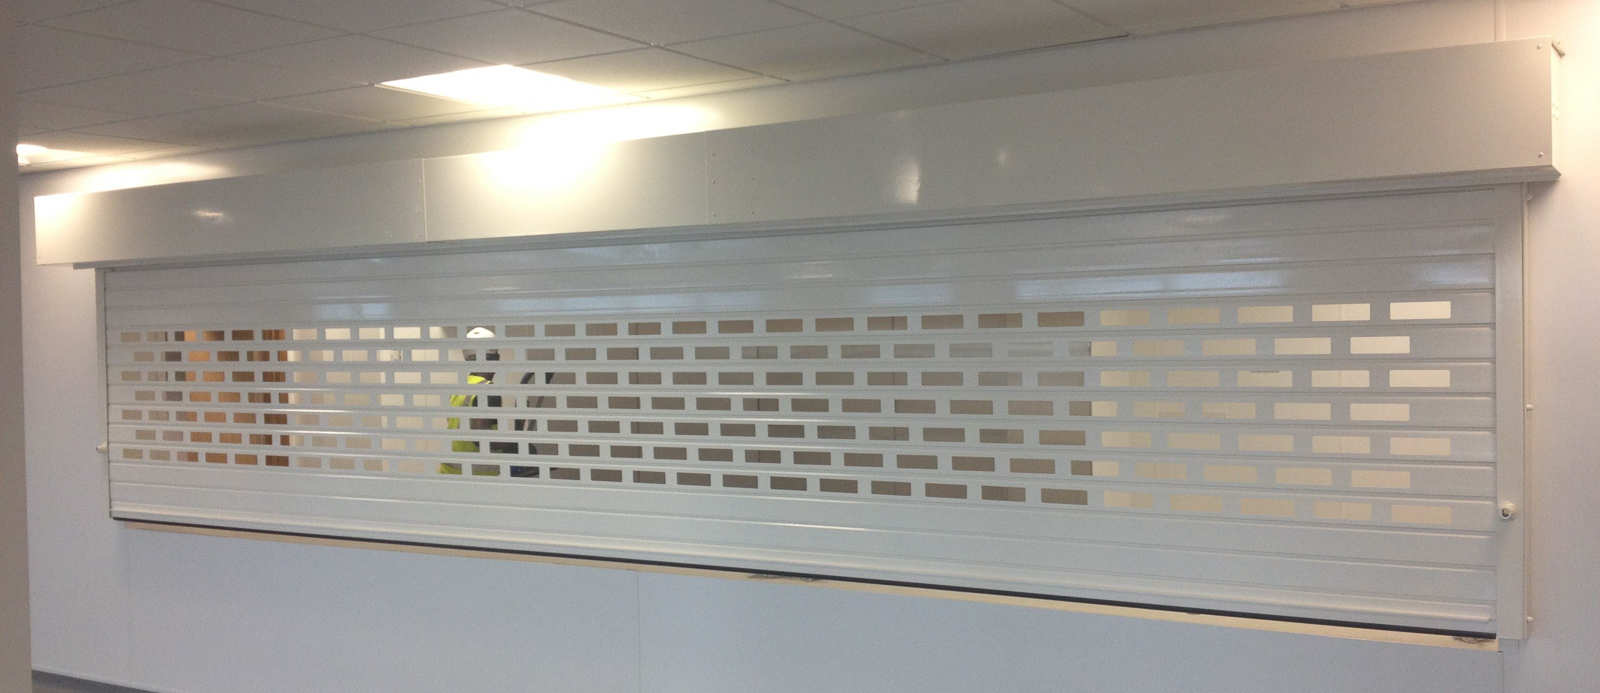 Polycarbonate Grille for Retail The Poly 